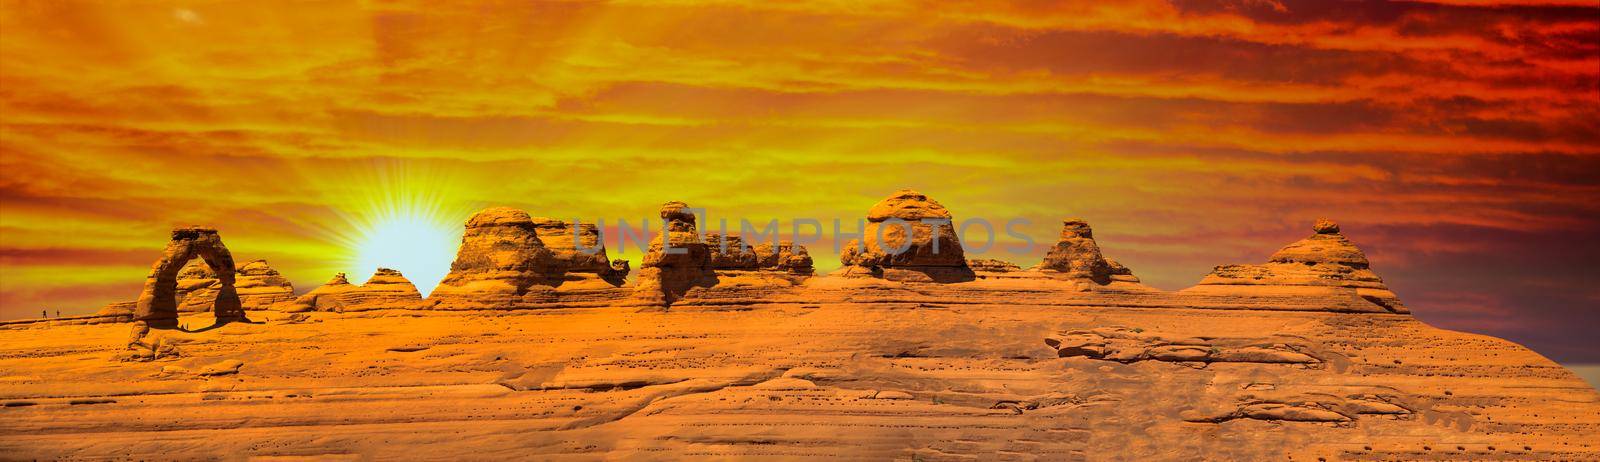 Delicate Arch panoramic view, Arches National Park. High resolution image of rock formations at sunset.